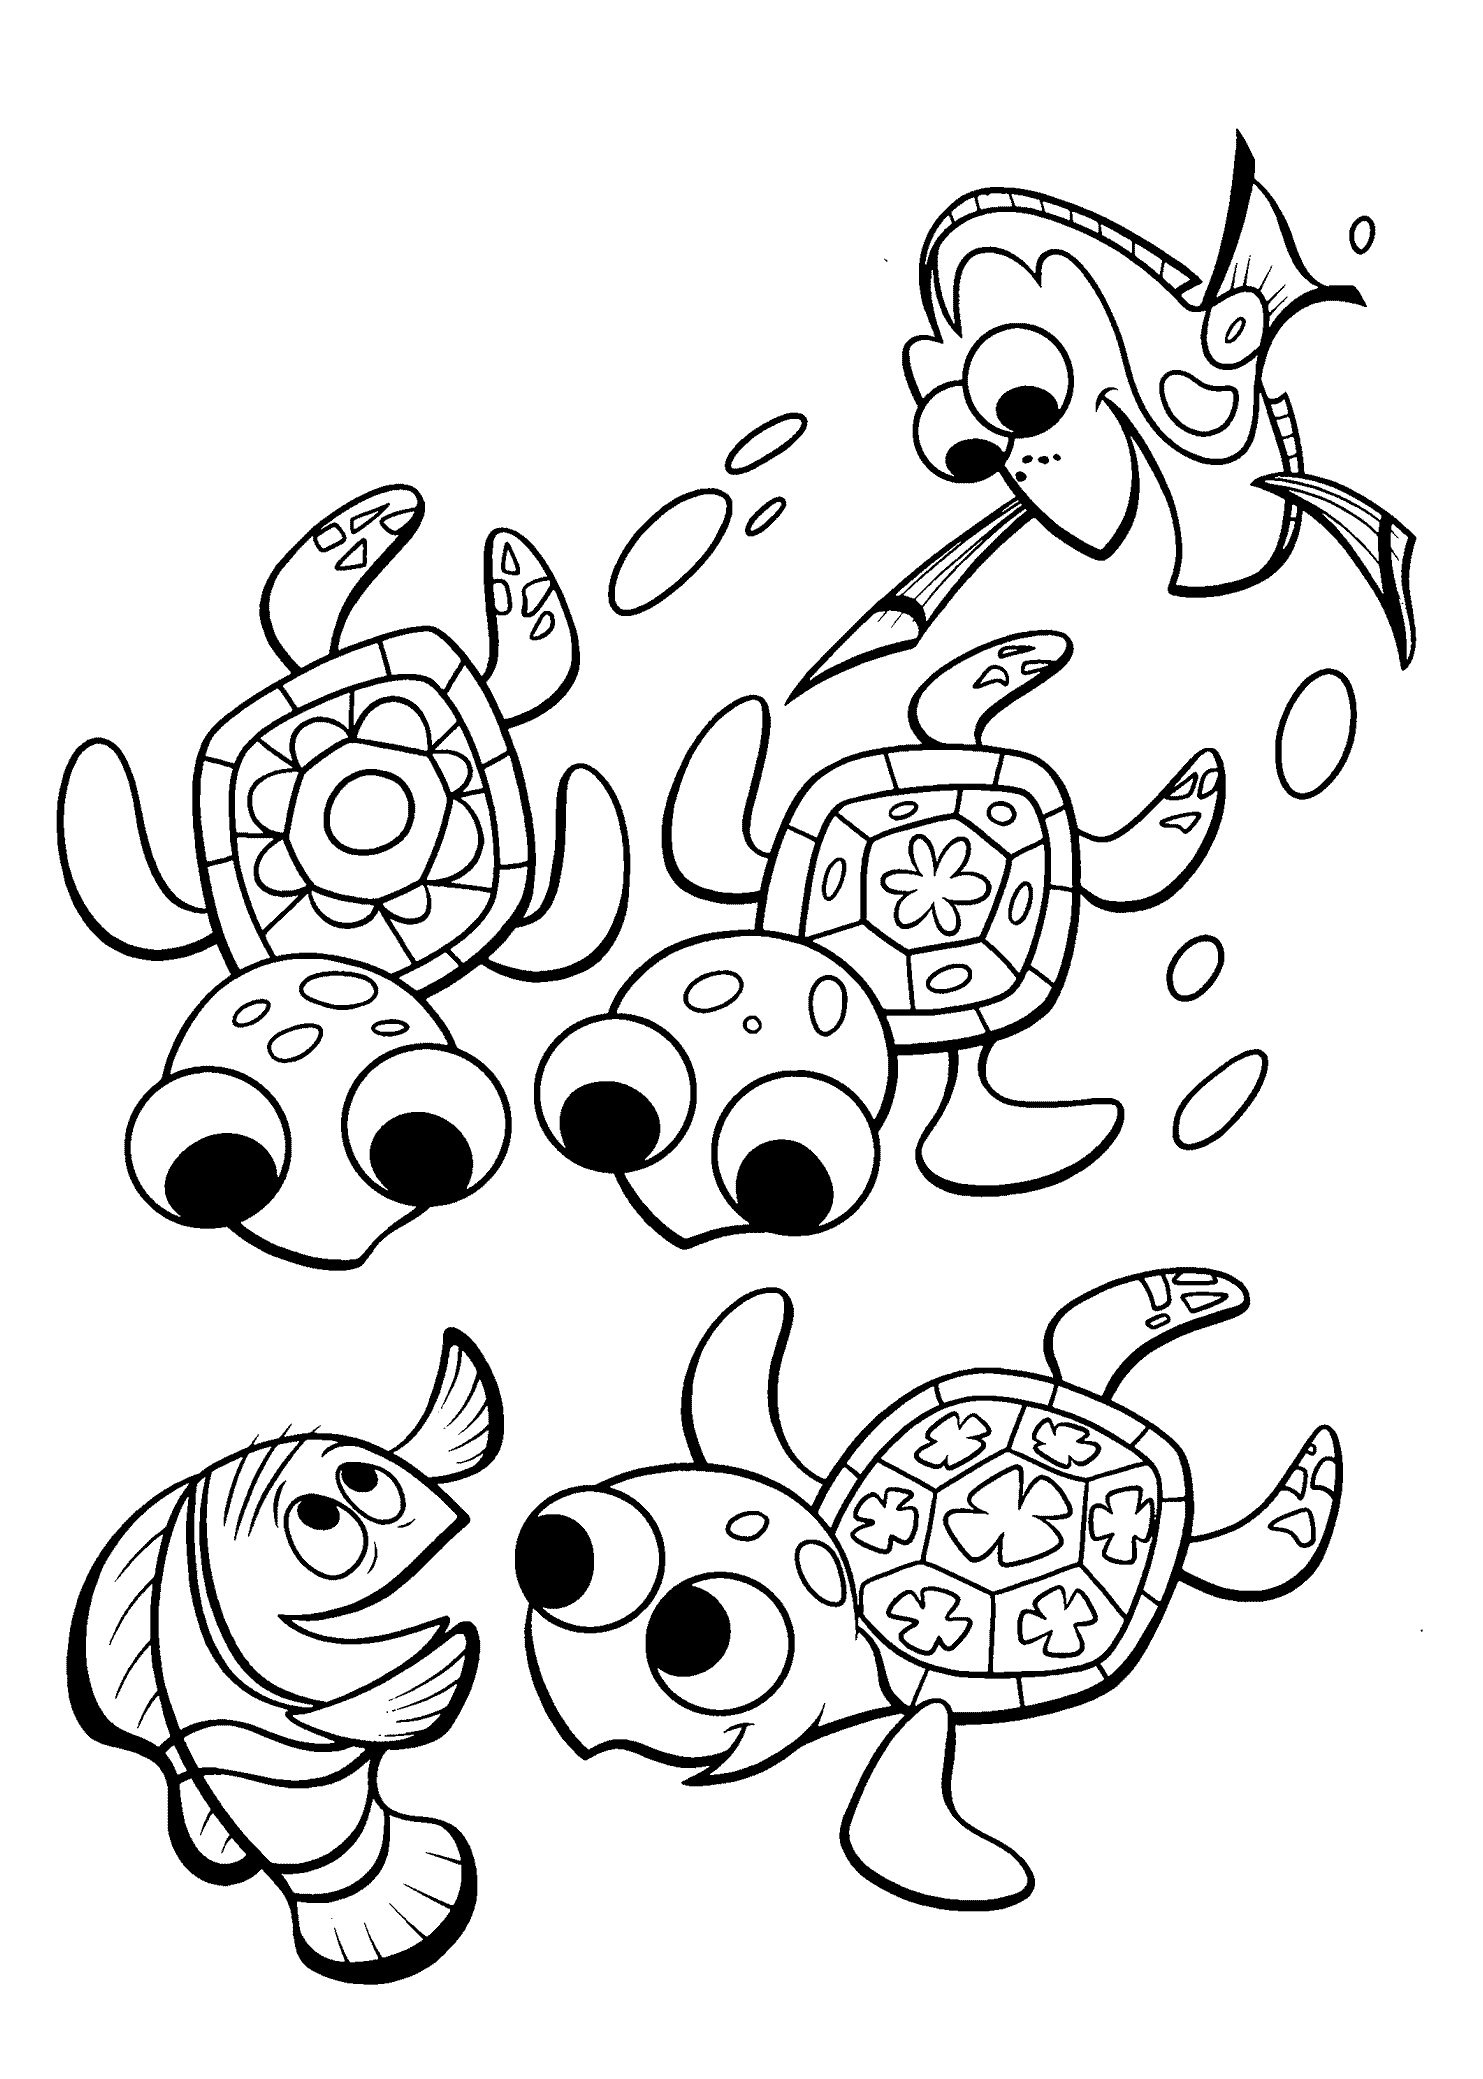 https://cdn.lowgif.com/small/2faff960bac2eb5d-finding-nemo-coloring-pages-turtles-for-kids-printable-free.gif